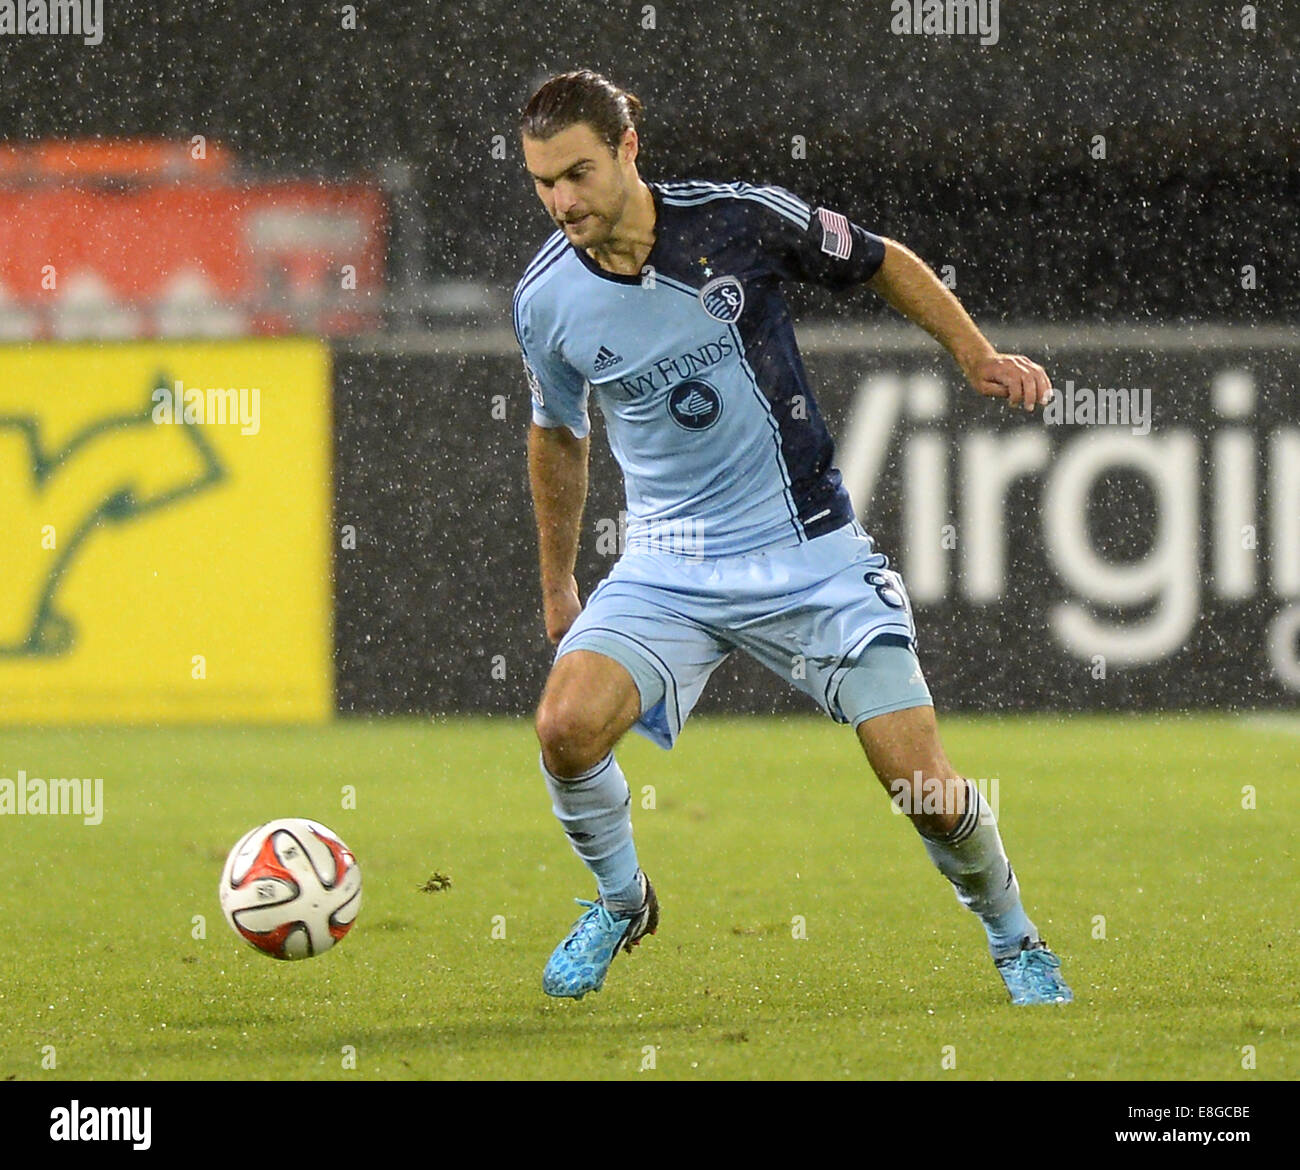 Washington, DC, USA. 3rd Oct, 2014. 20141003 - Sporting KC midfielder Graham Zusi plays the ball in the rain during the match against D.C. United at RFK Stadium in Washington. © Chuck Myers/ZUMA Wire/Alamy Live News Stock Photo